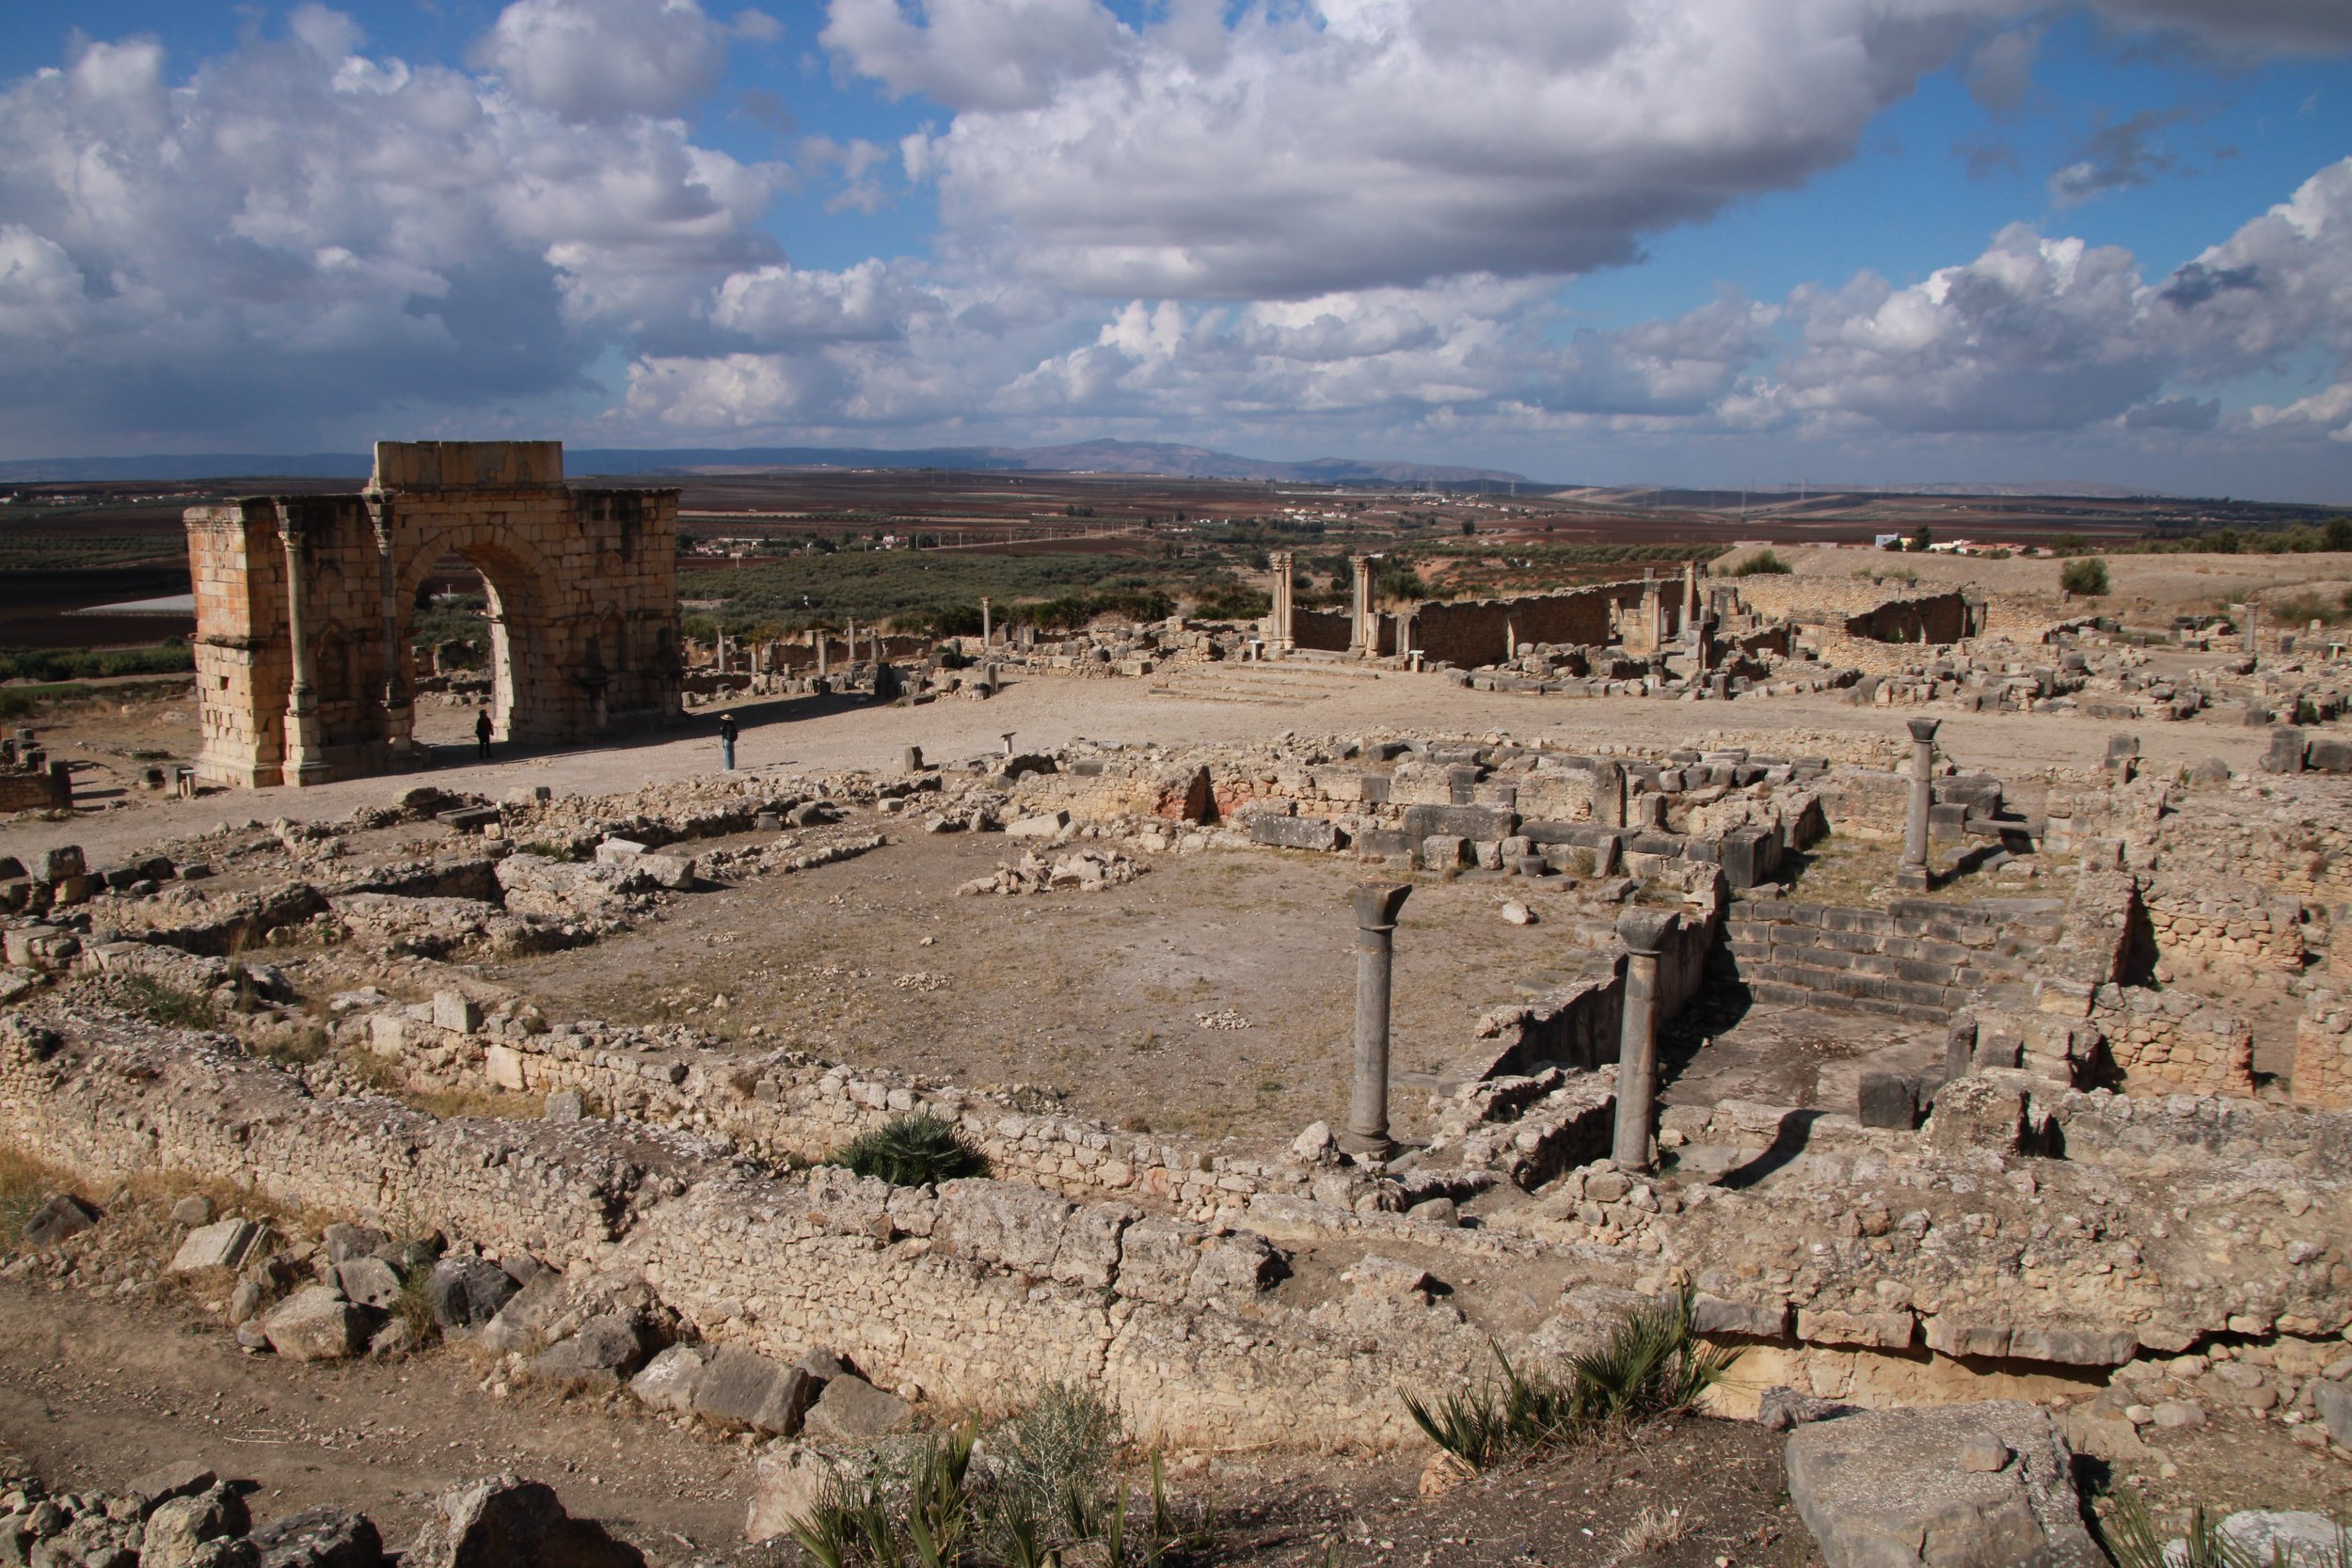  PICTURED: The sun finally breaks during a cloudy November day on the 3rd century Roman ruins of Volubilis, near Meknes. PC: Andrew Corbley © 